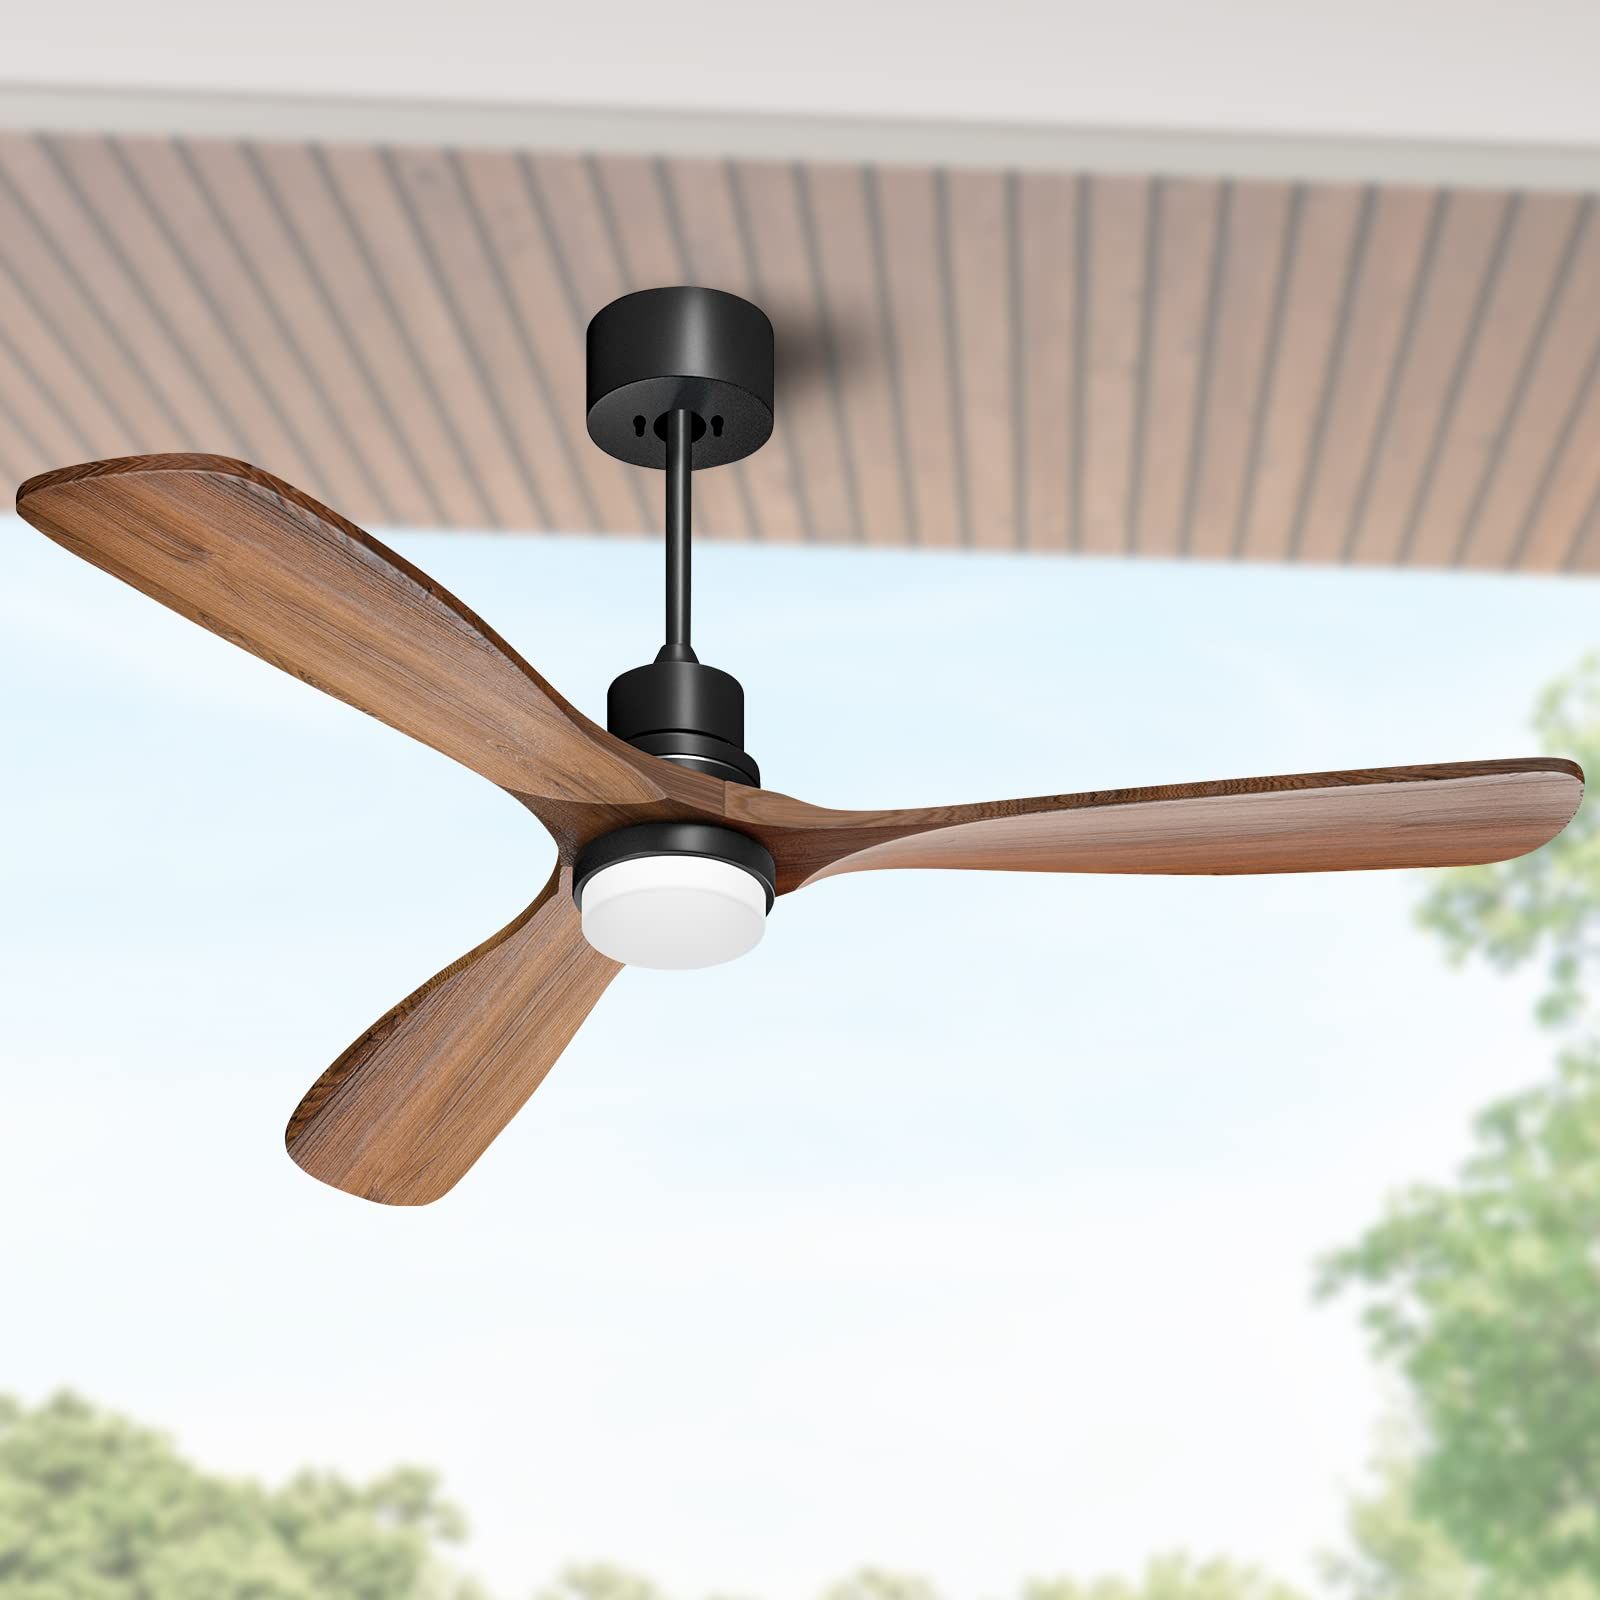 Obabala 52" Ceiling Fan with Lights Remote Control Outdoor Wood Ceiling Fans Noiseless Reversible DC | Amazon (US)